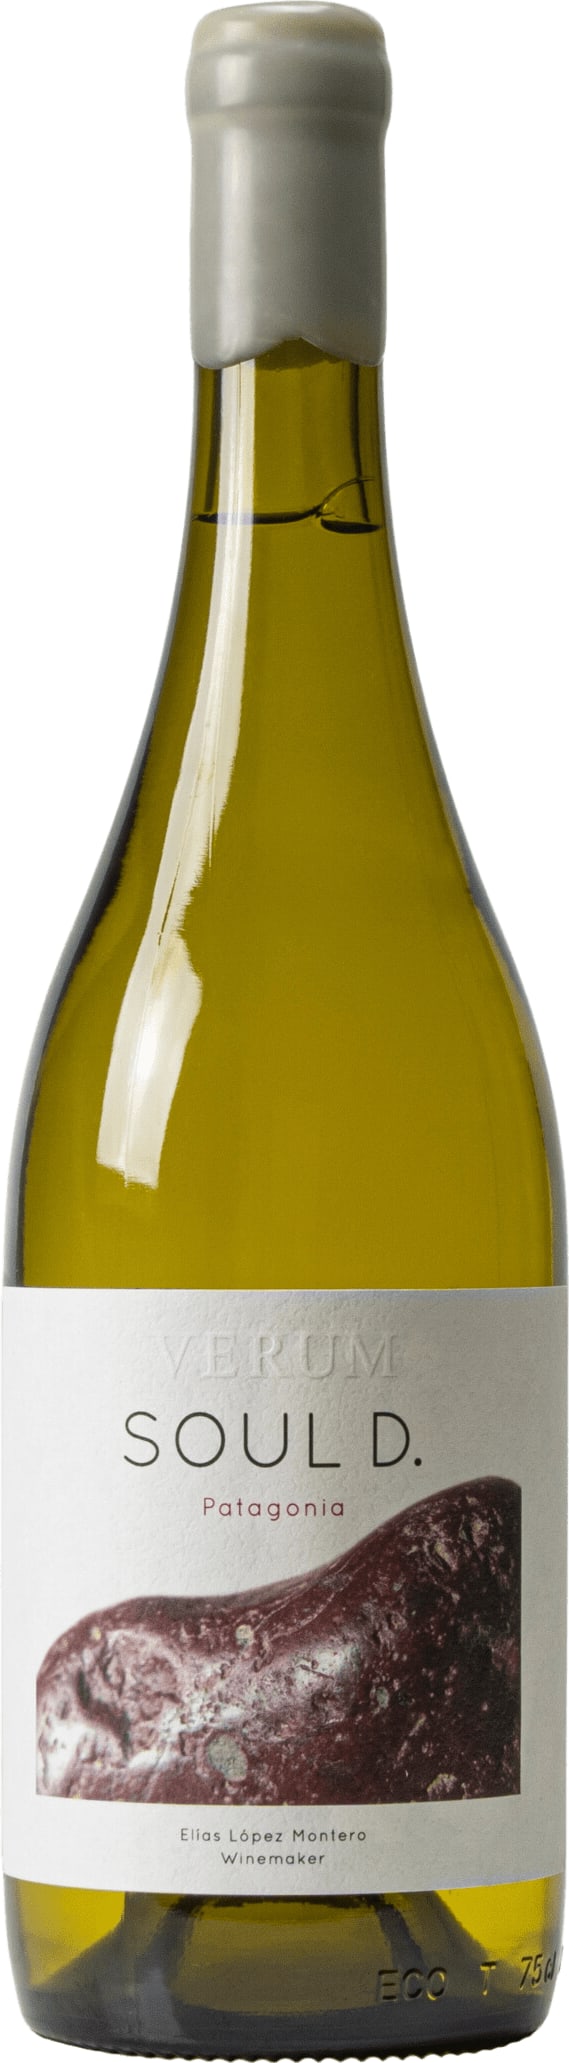 Bodegas Verum Soul D Chardonnay 2019 75cl - Buy Bodegas Verum Wines from GREAT WINES DIRECT wine shop